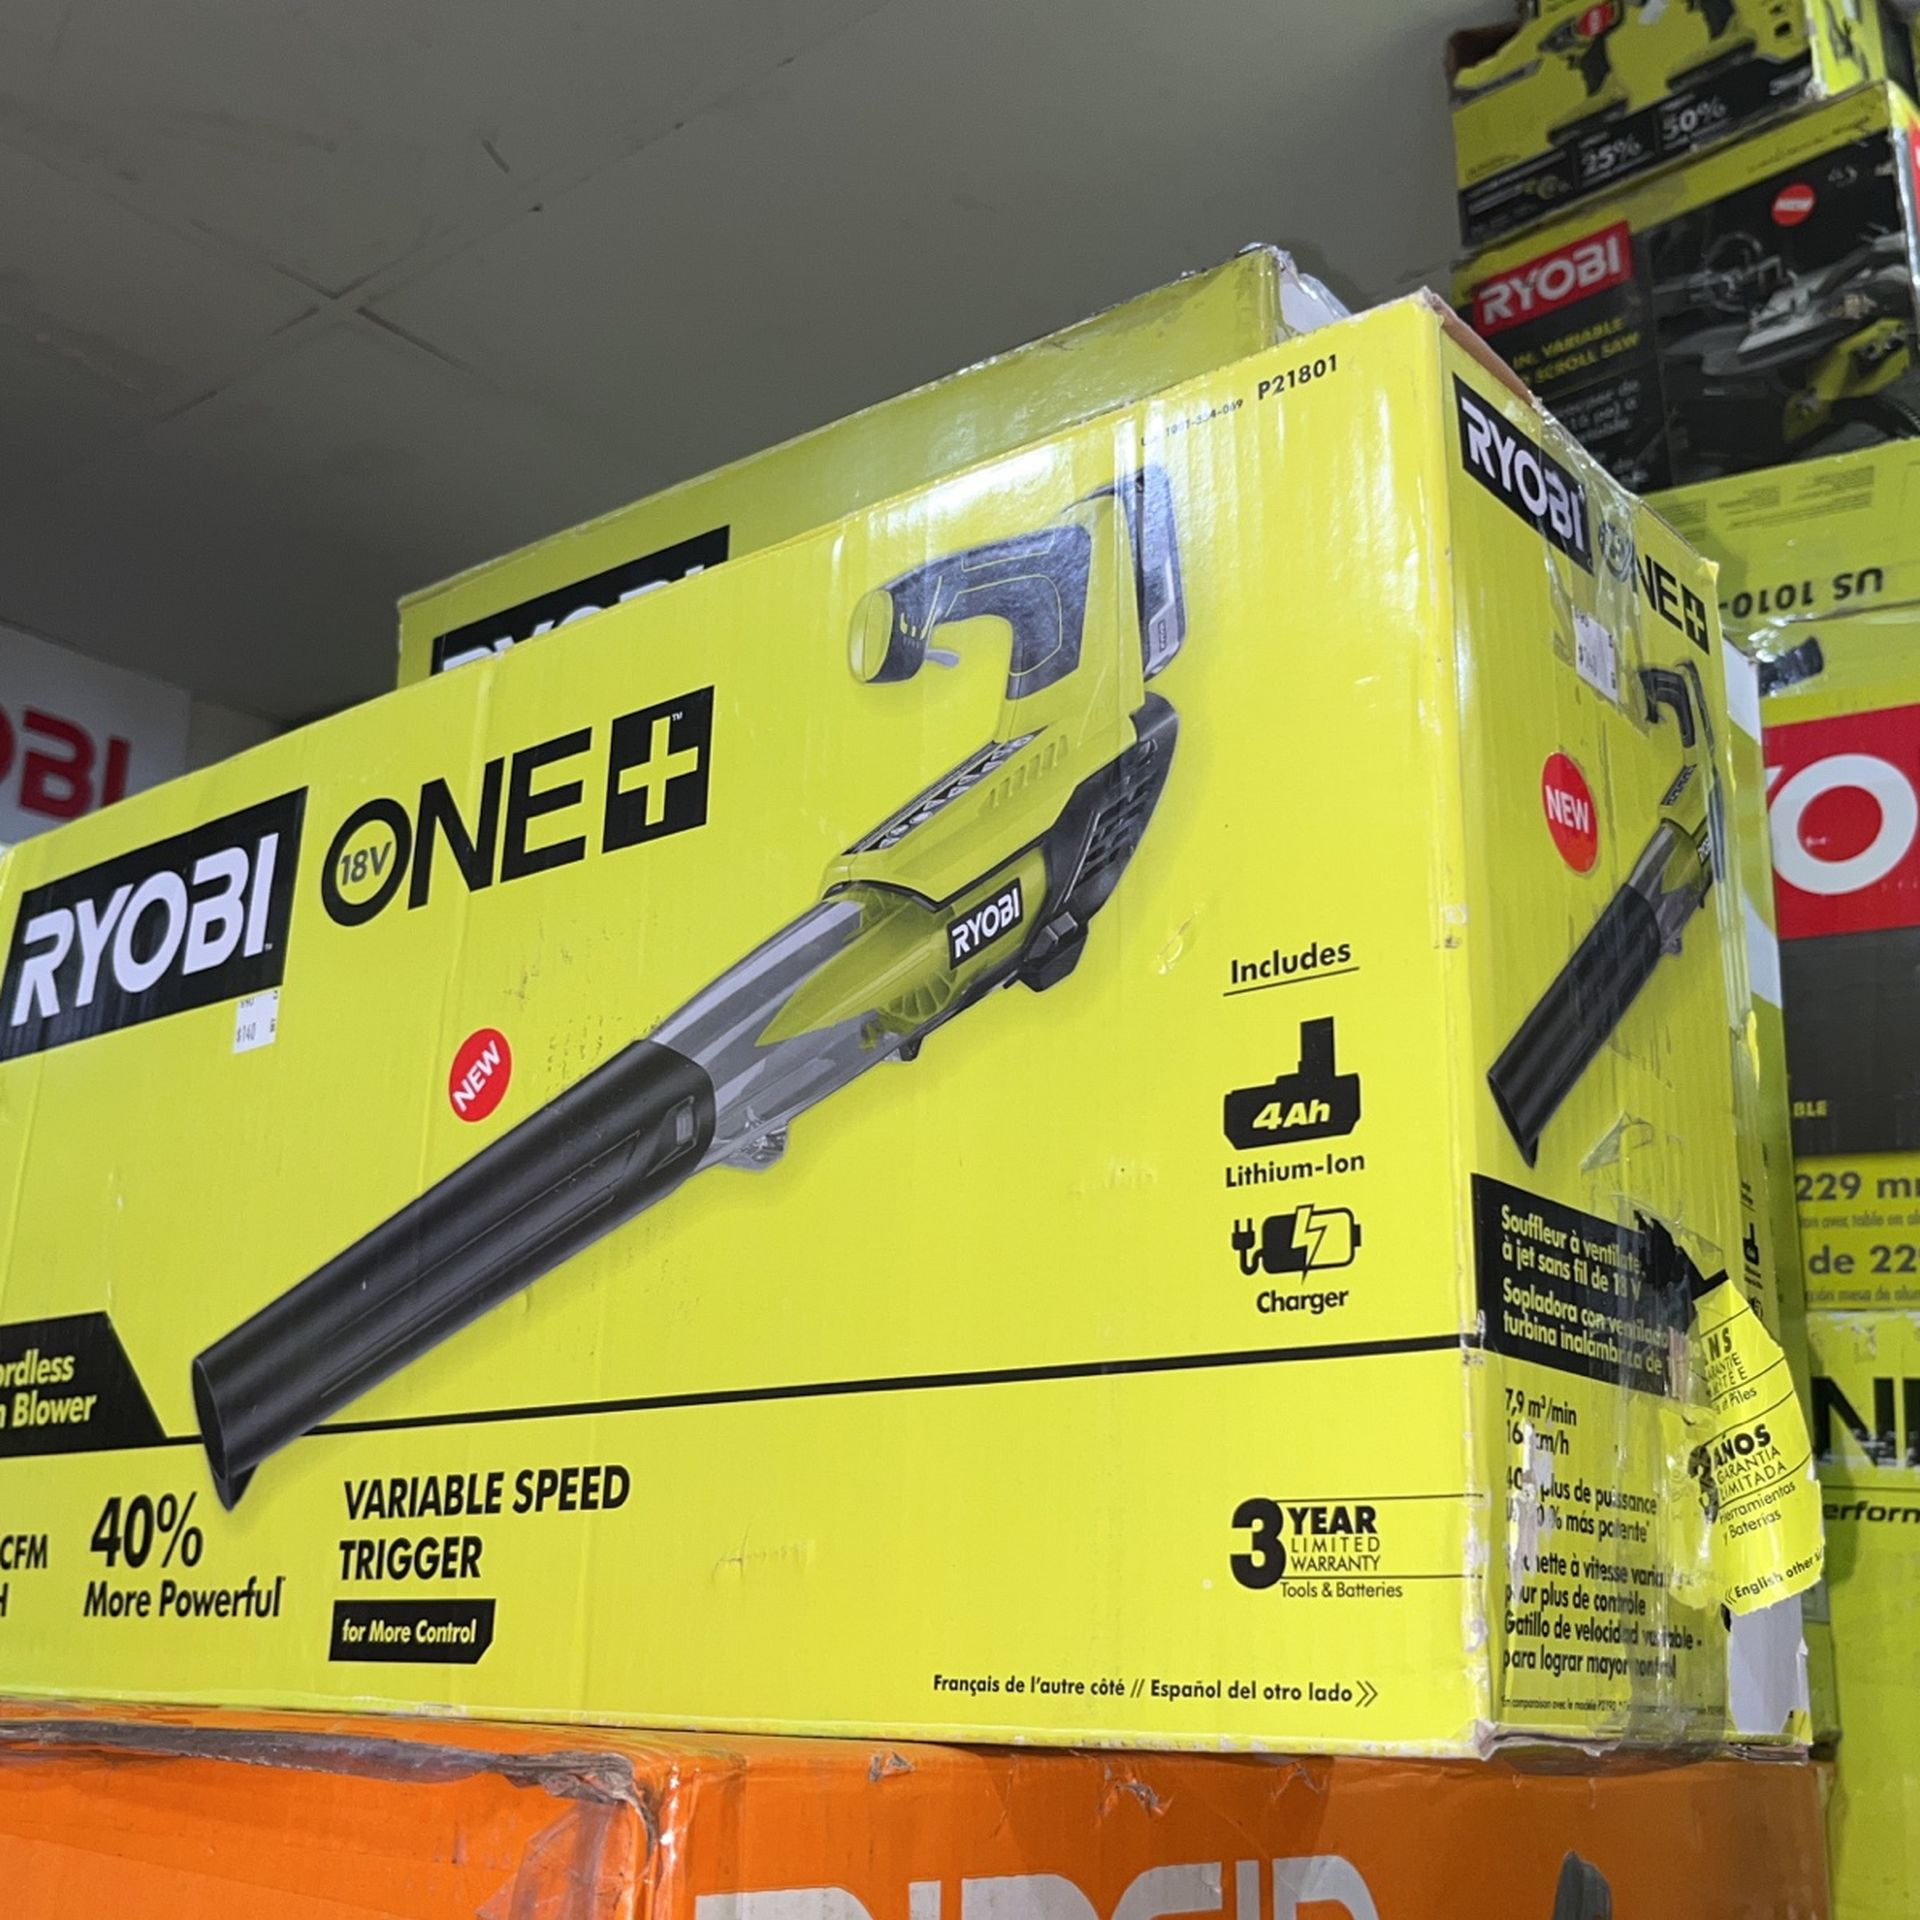 18 Volt Ryobi Cordless Jet Fan Blower Kit with Battery,Charger $140 